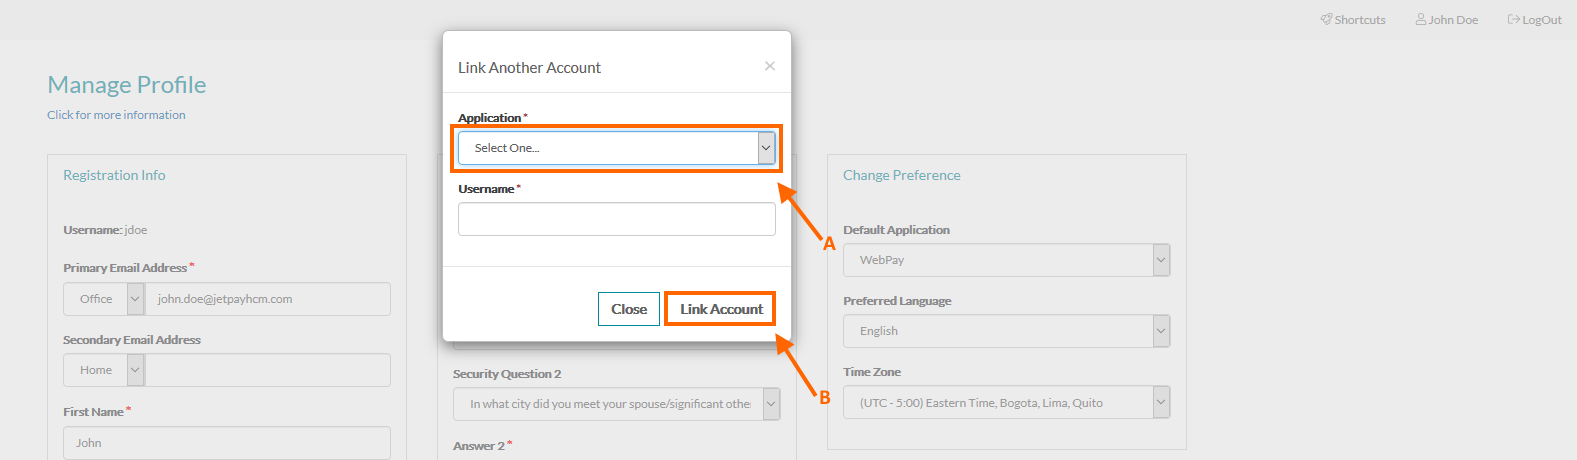 A pop-up will be displayed, follow the instructions on the pop-up to complete the process of linking an account.